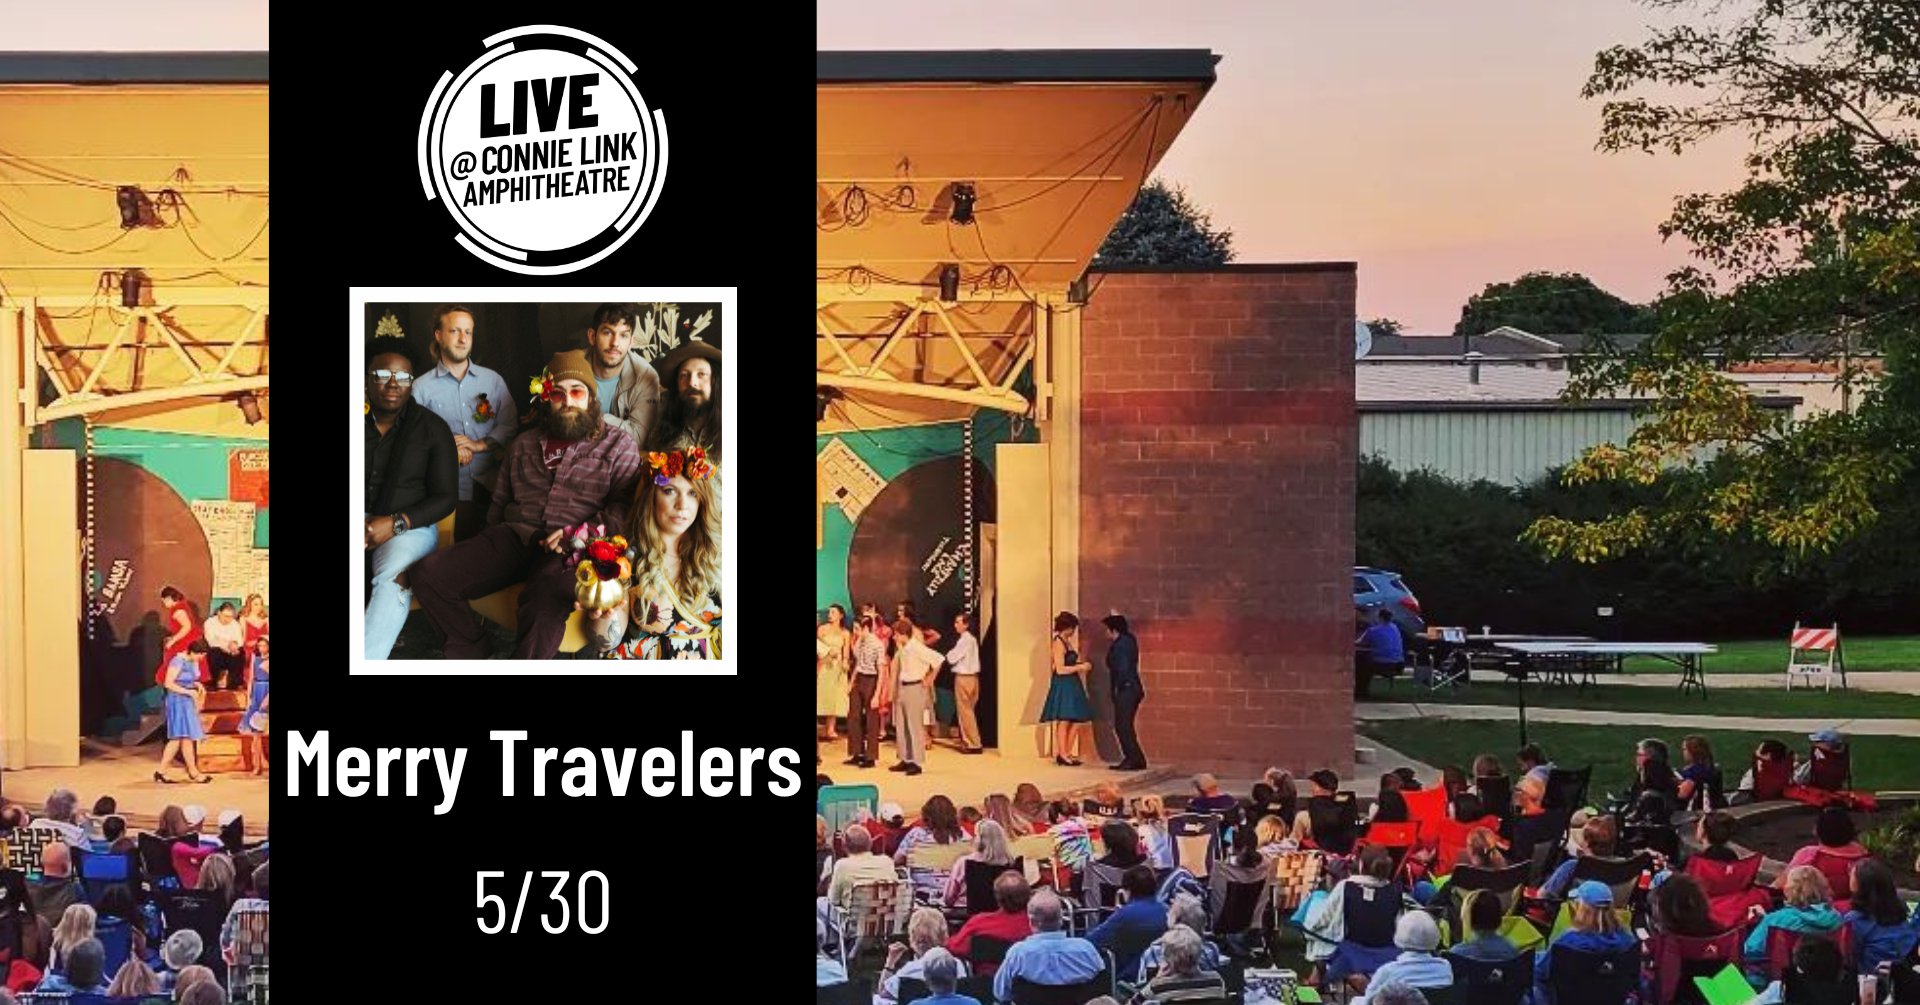 Normal LIVE presents Merry Travelers @ Connie Link Amphitheatre